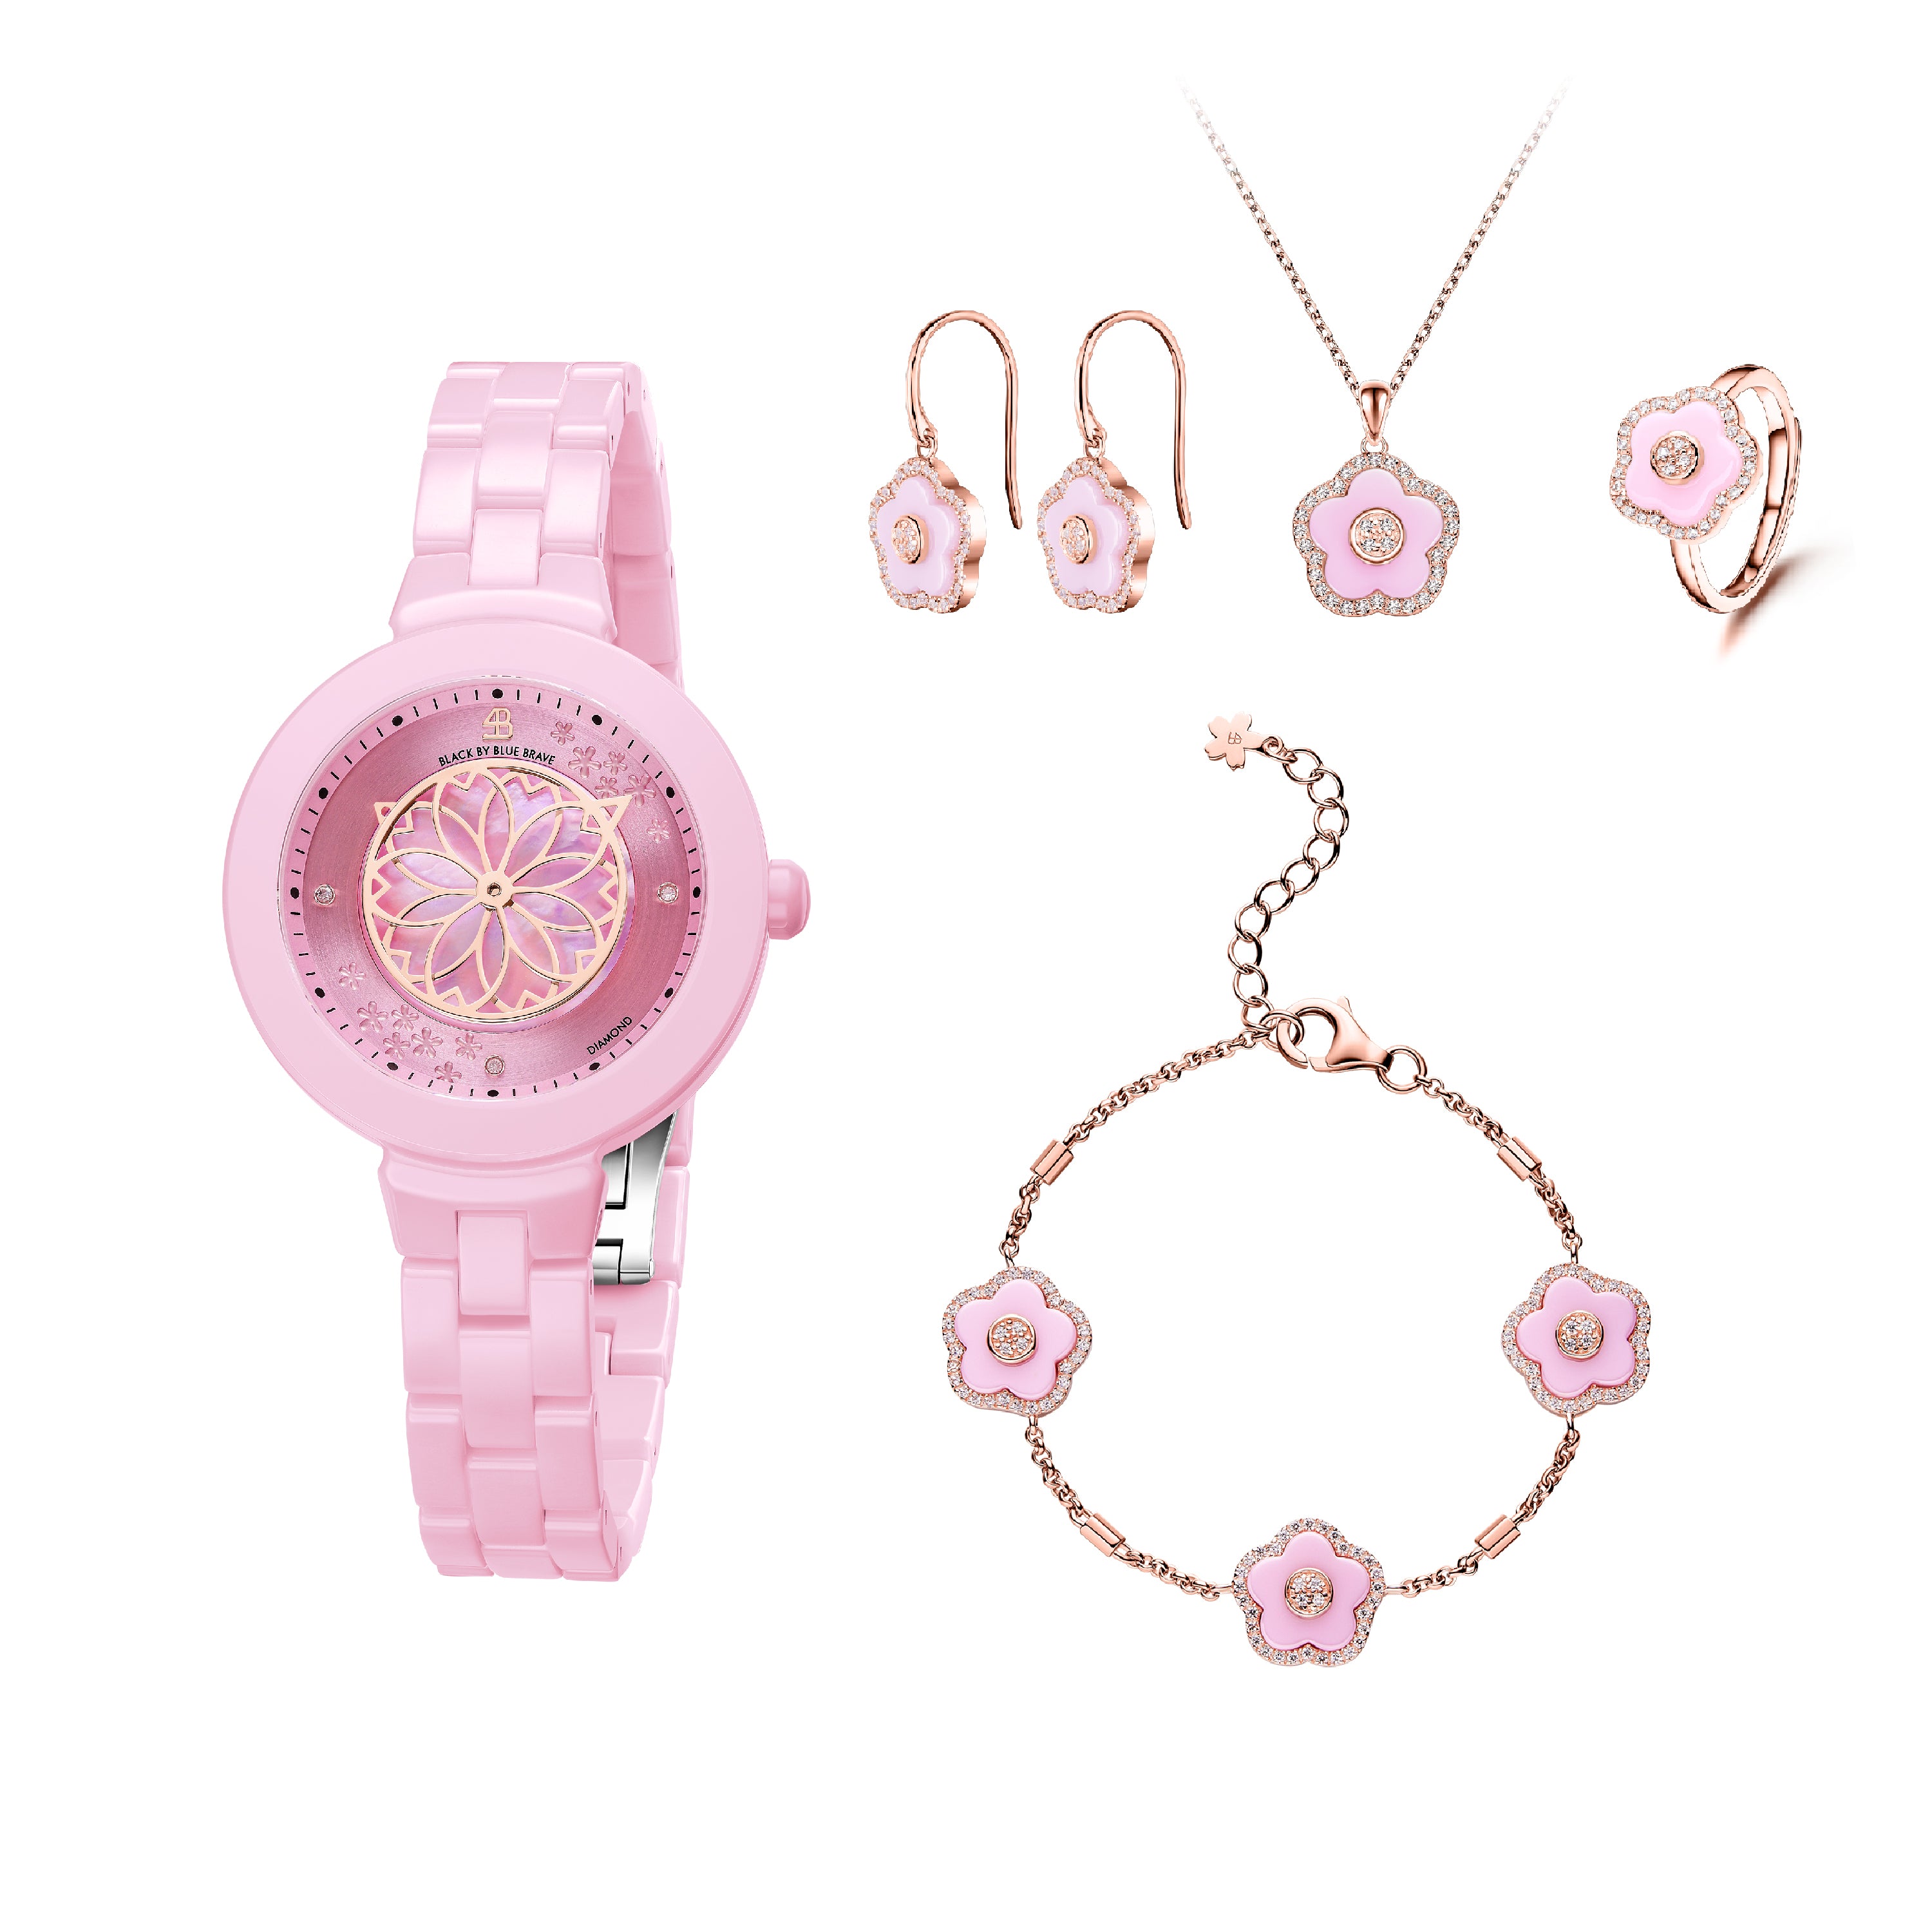 Pink Diamond Cherry Blossom Ceramic Watch With Flower Ceramic Jewelleries (Earrings & Necklace & Bracelet & Ring)